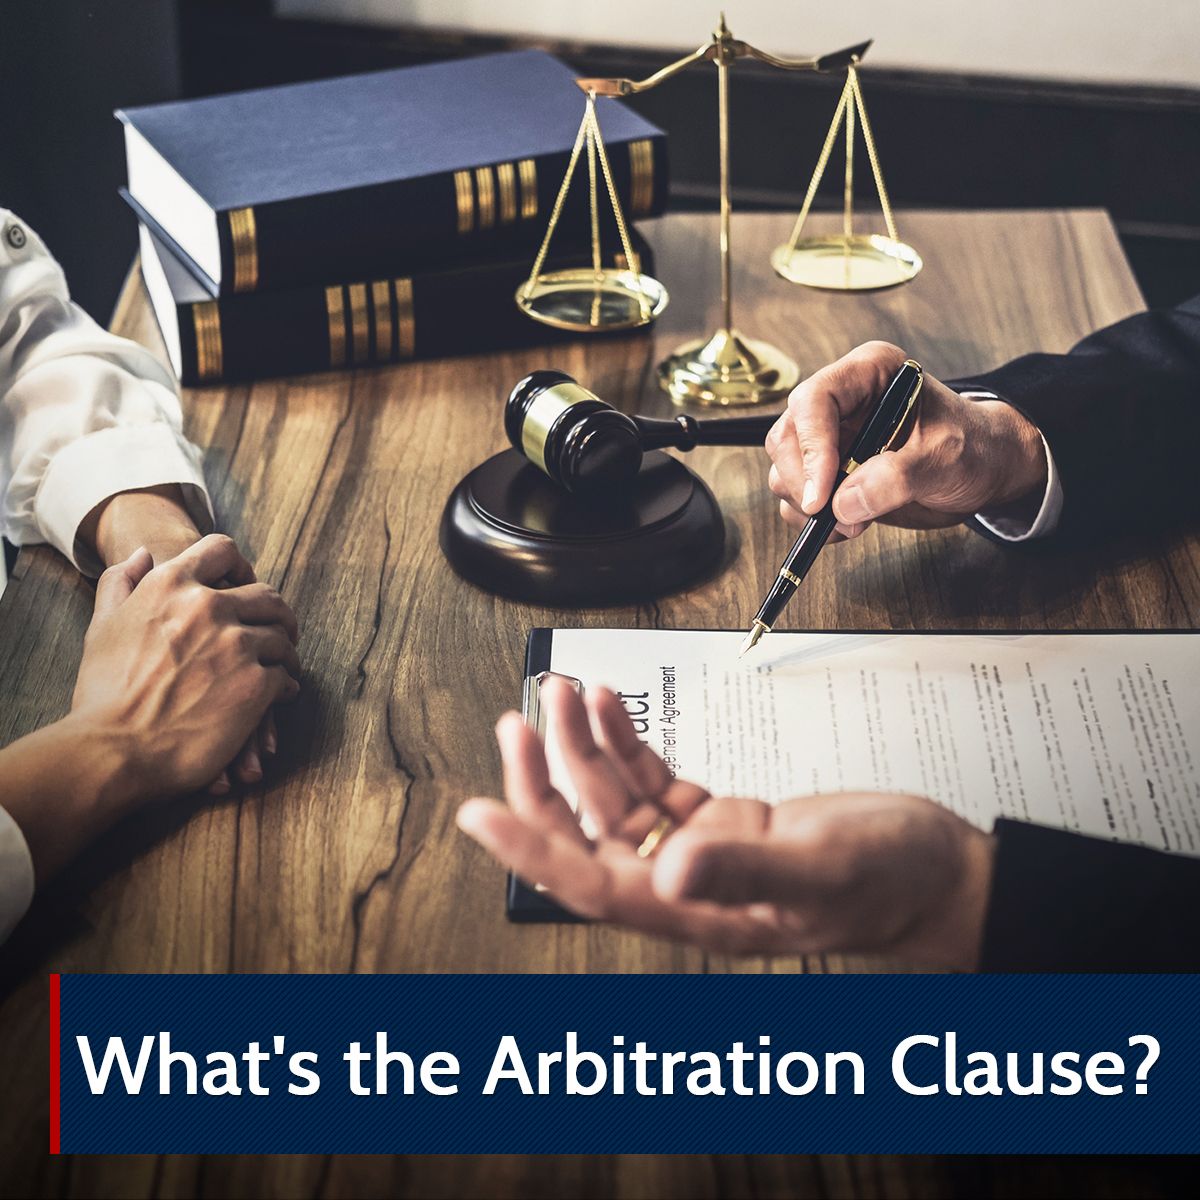 What's the Arbitration Clause?